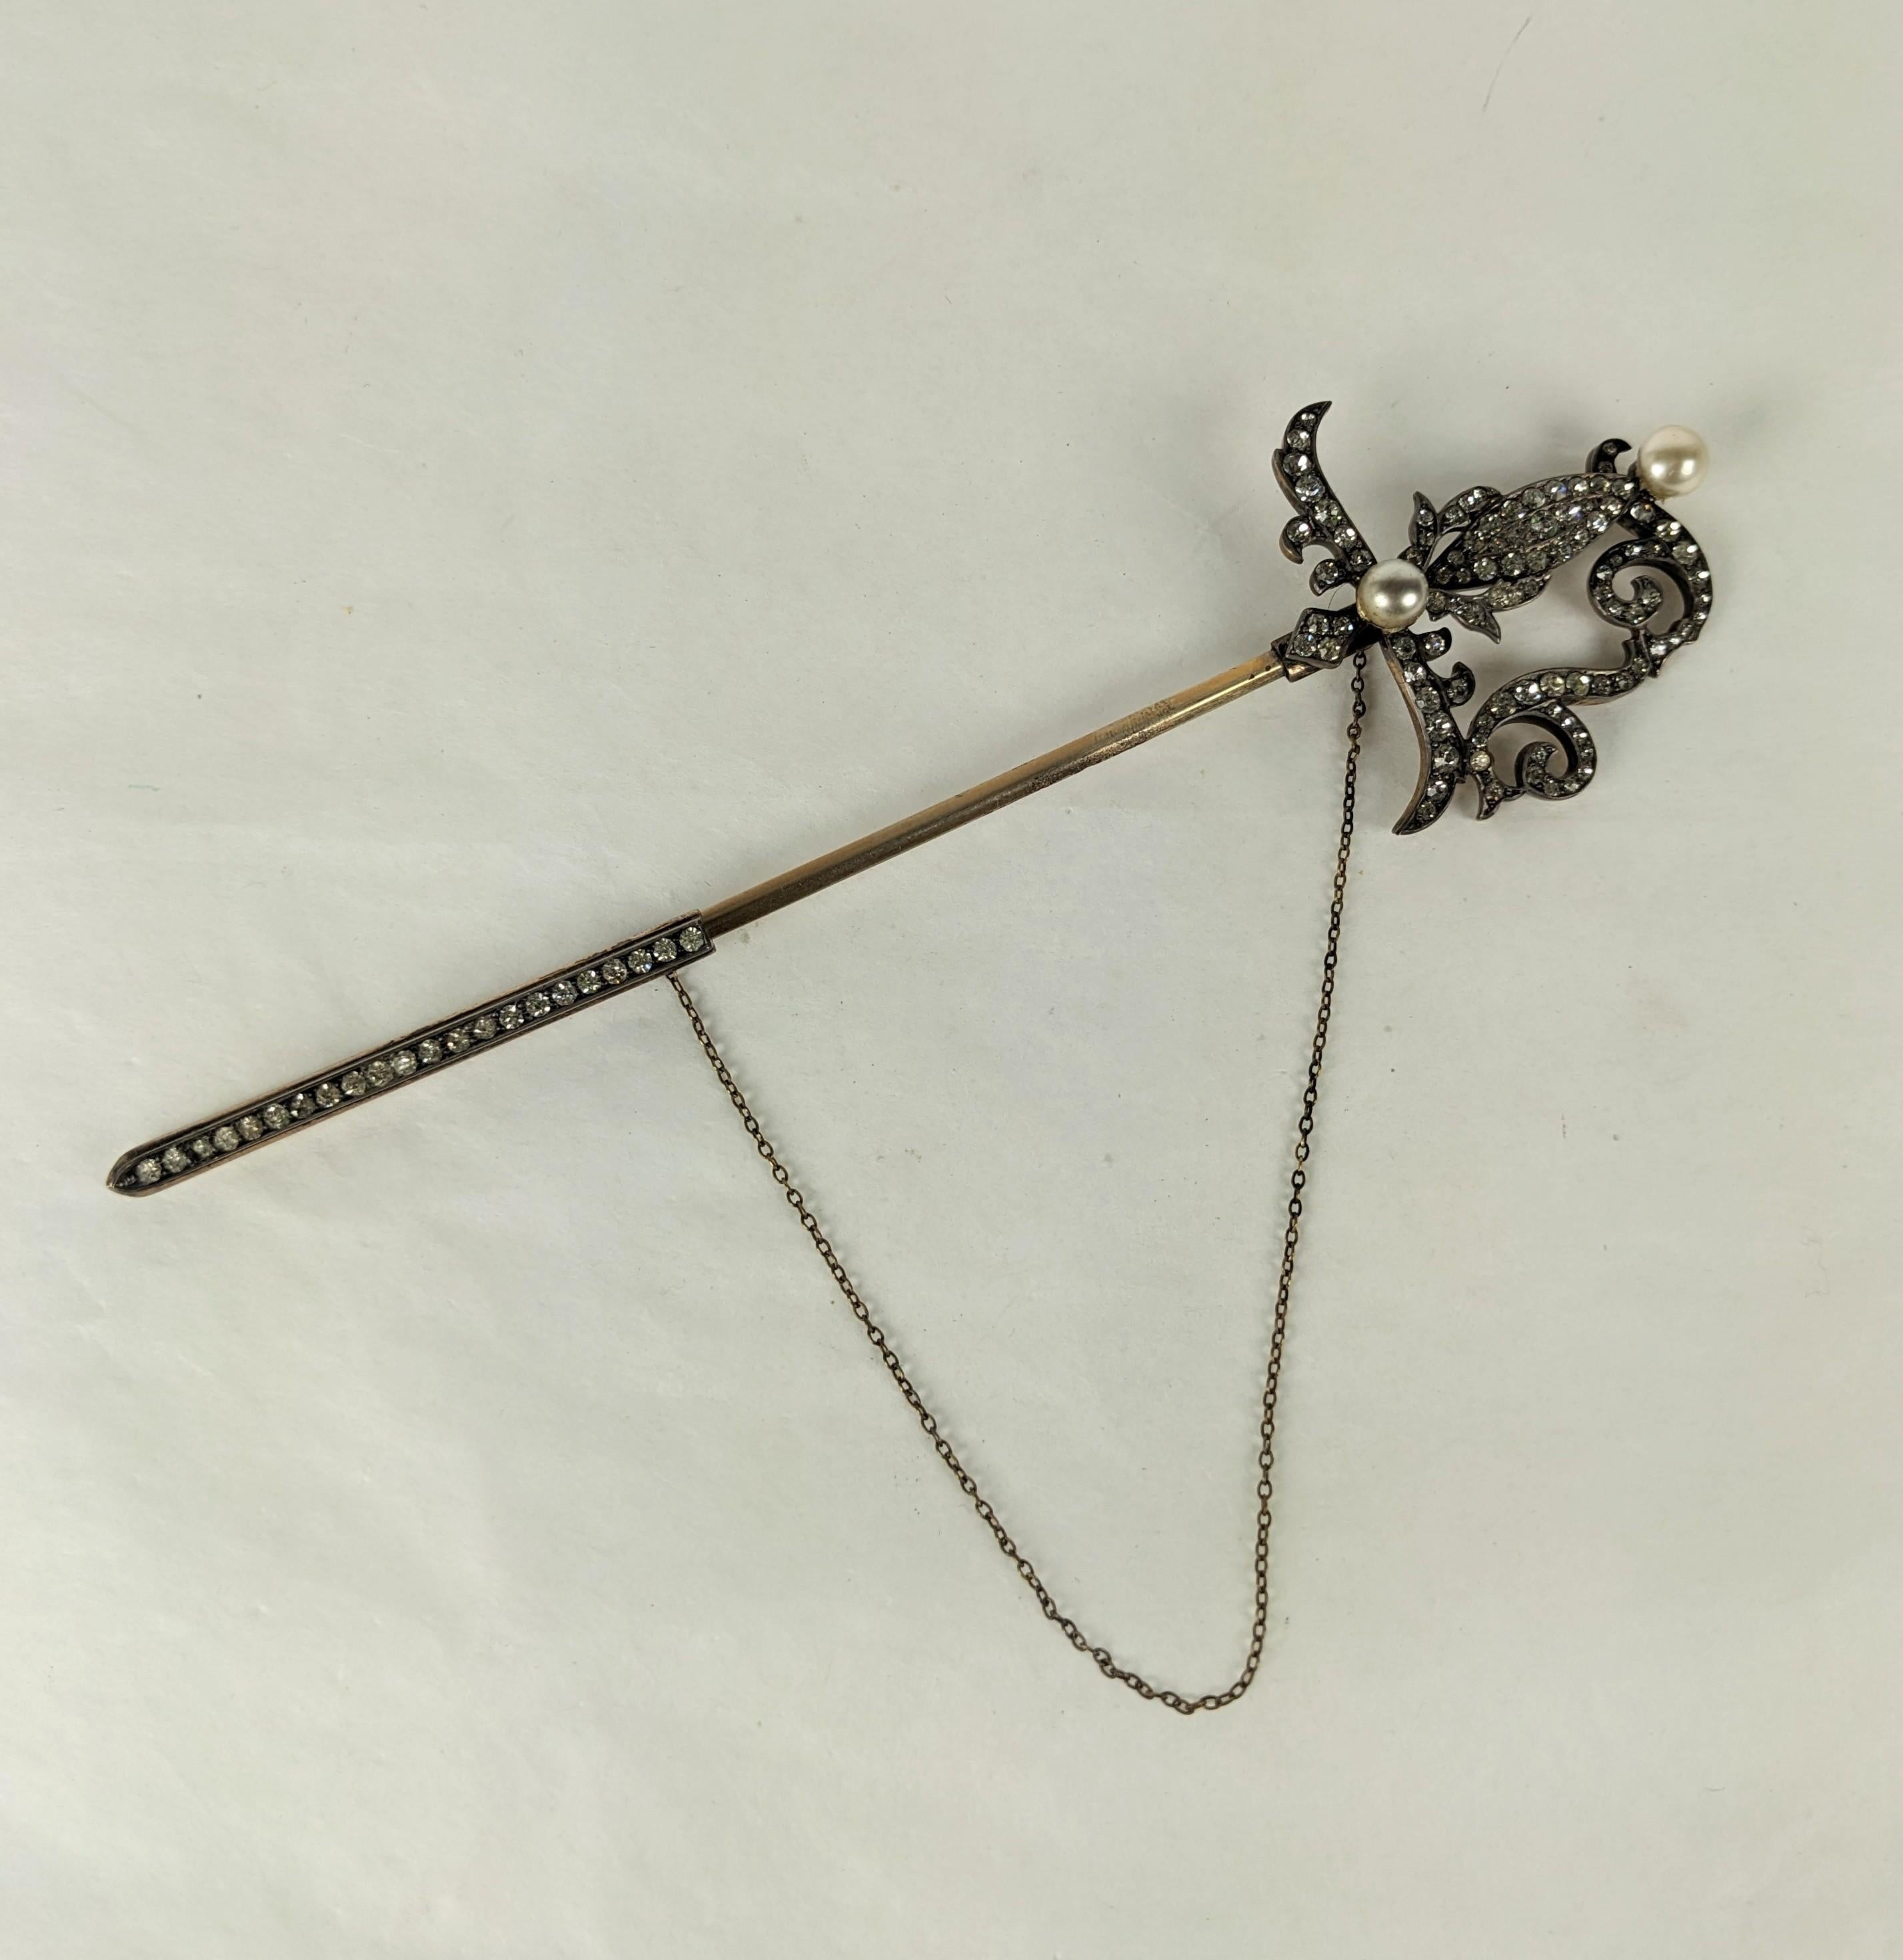 Massive and exceptional 19th Century Paste Sword Jabot Brooch from the l9th Century. Designed likely for a heavy cloak or cape set in sterling with pastes and faux pearls. 
Gold Vermeil backing with safety chain attached. 6.5